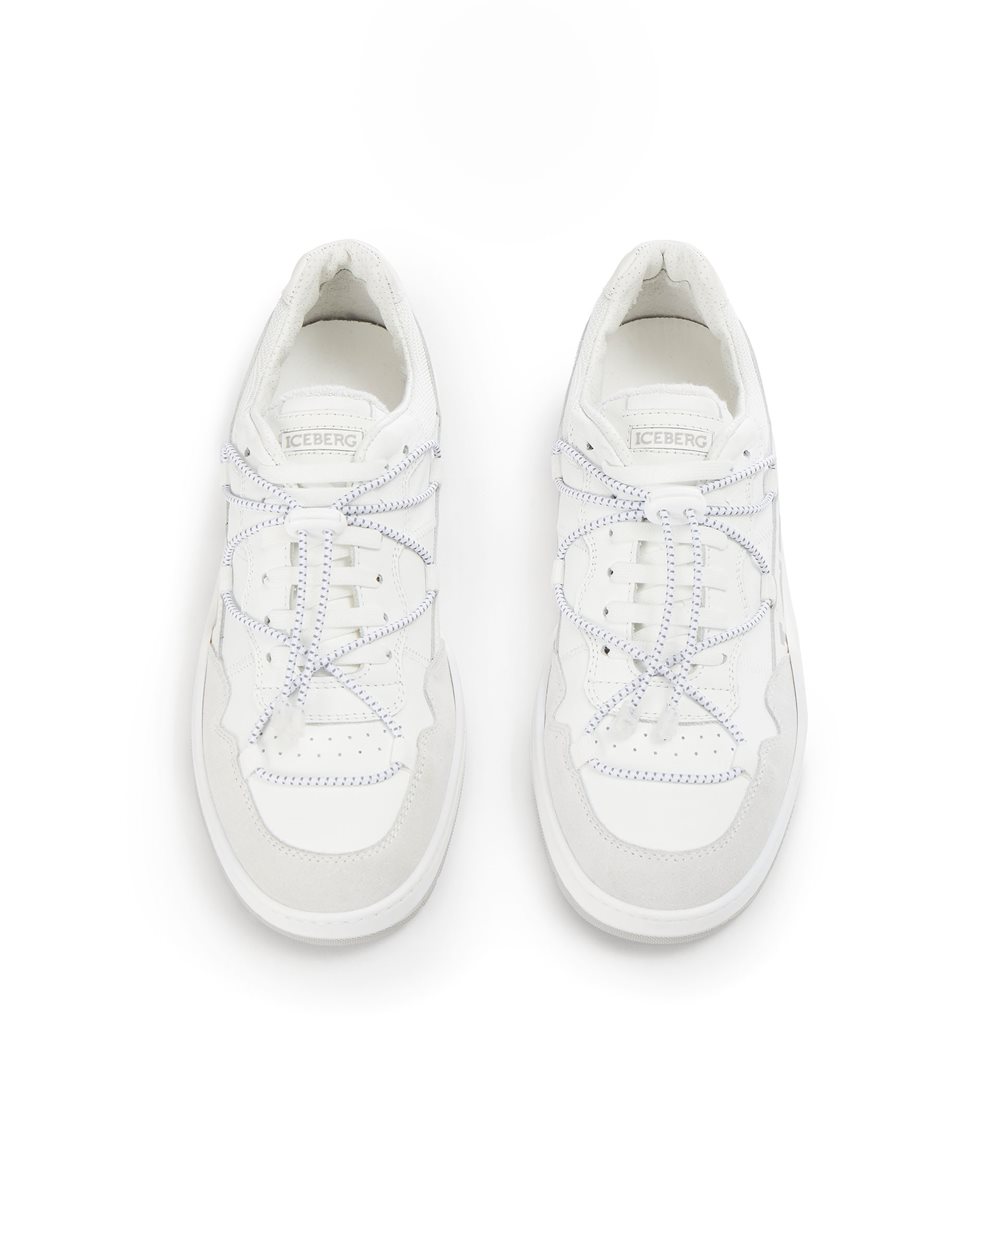 Okoro nubuk and leather sneakers - Iceberg - Official Website